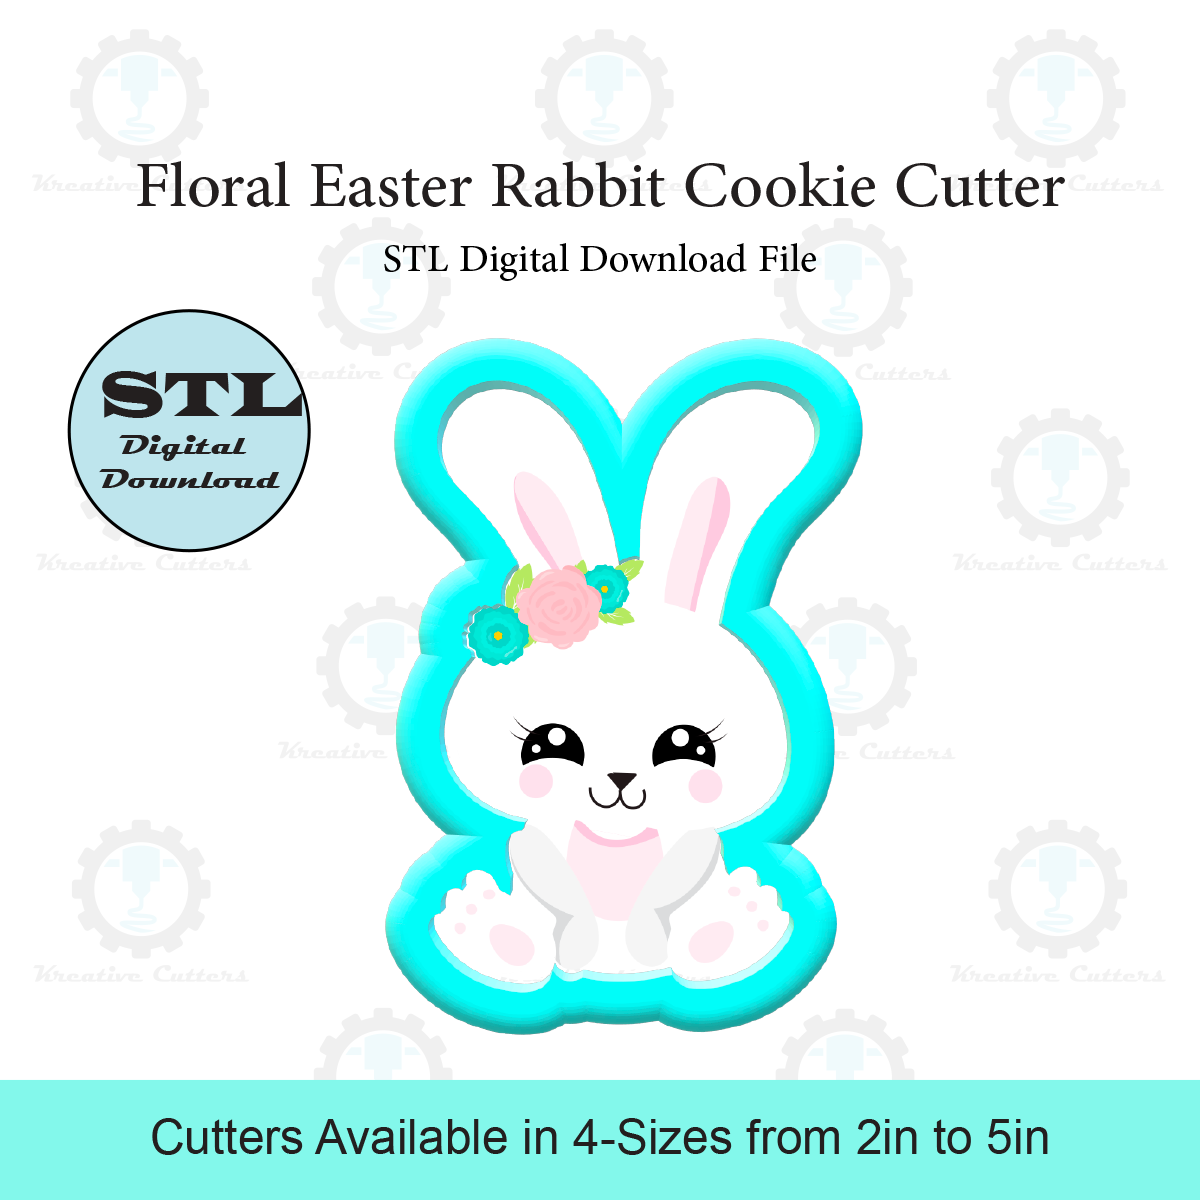 Floral Easter Rabbit Cookie Cutter